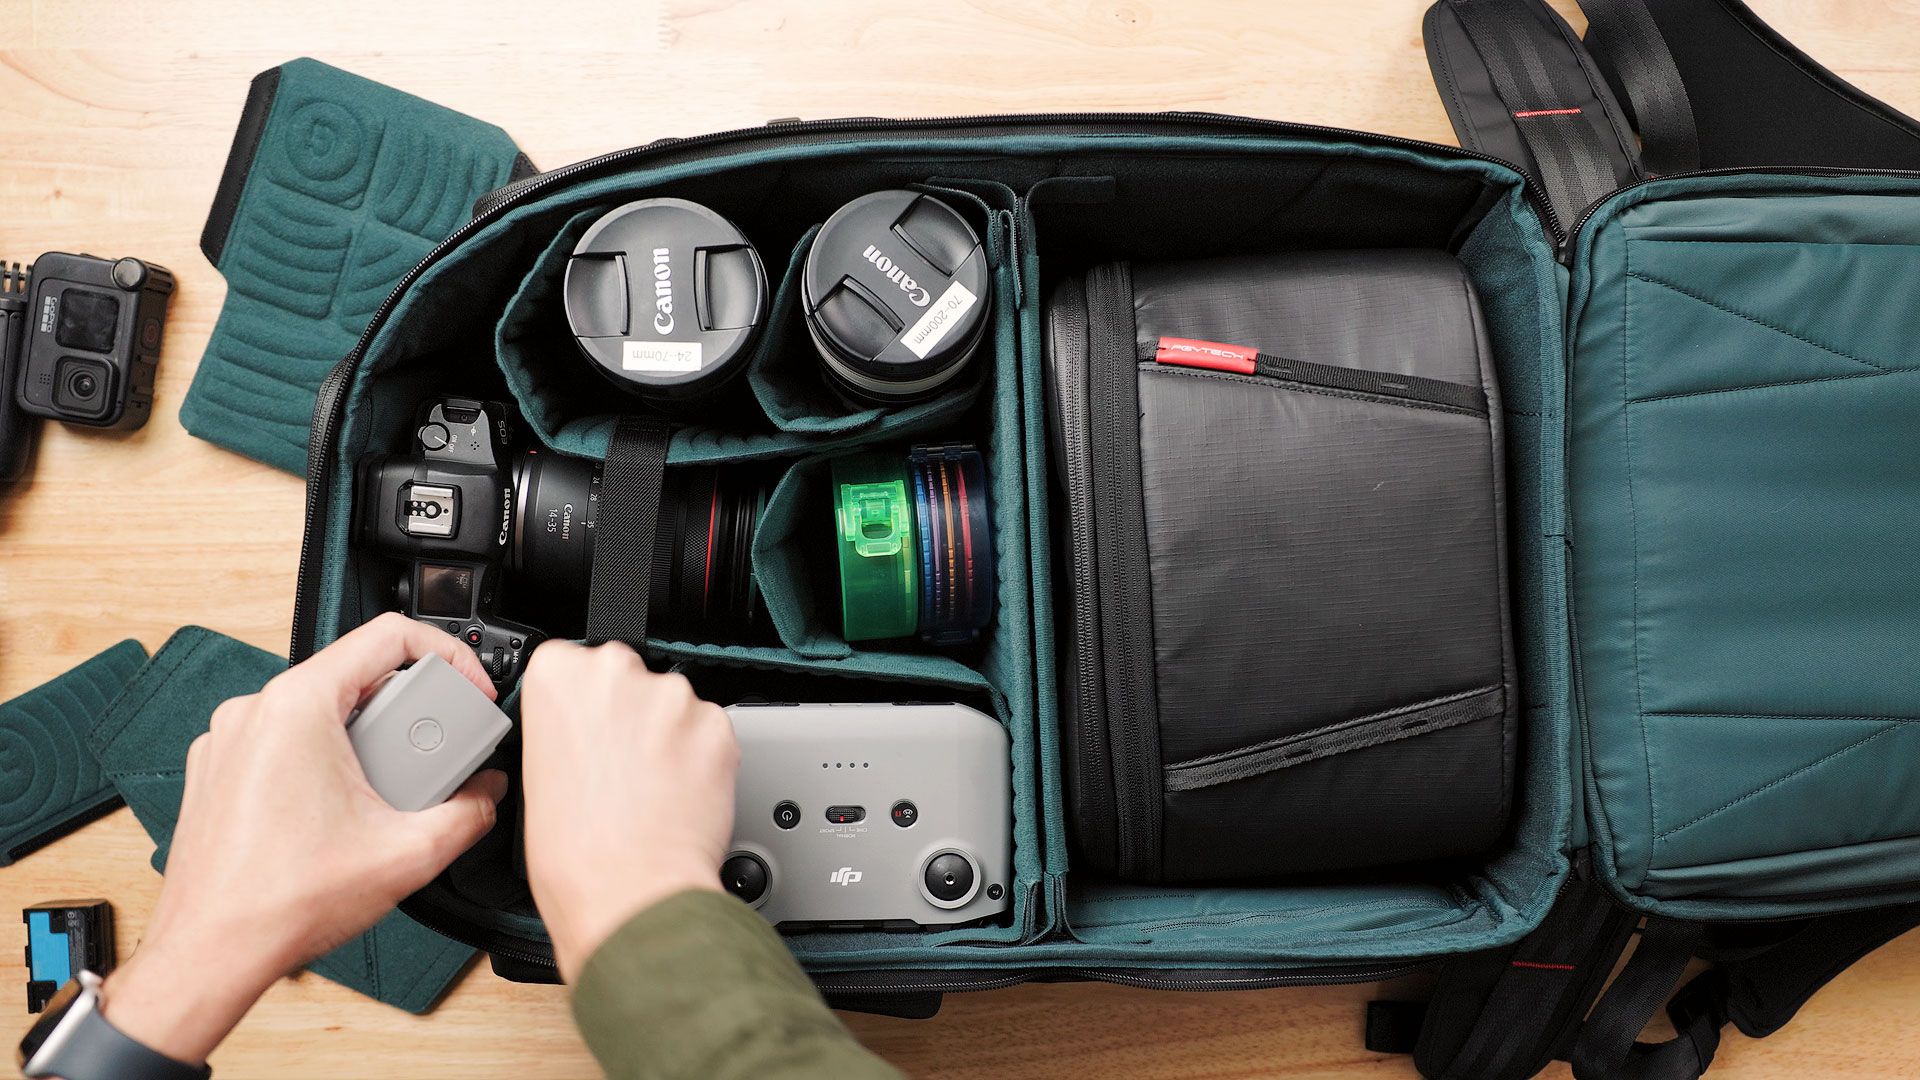 Organizing camera gear and shoulder bag inside the OneMo 2